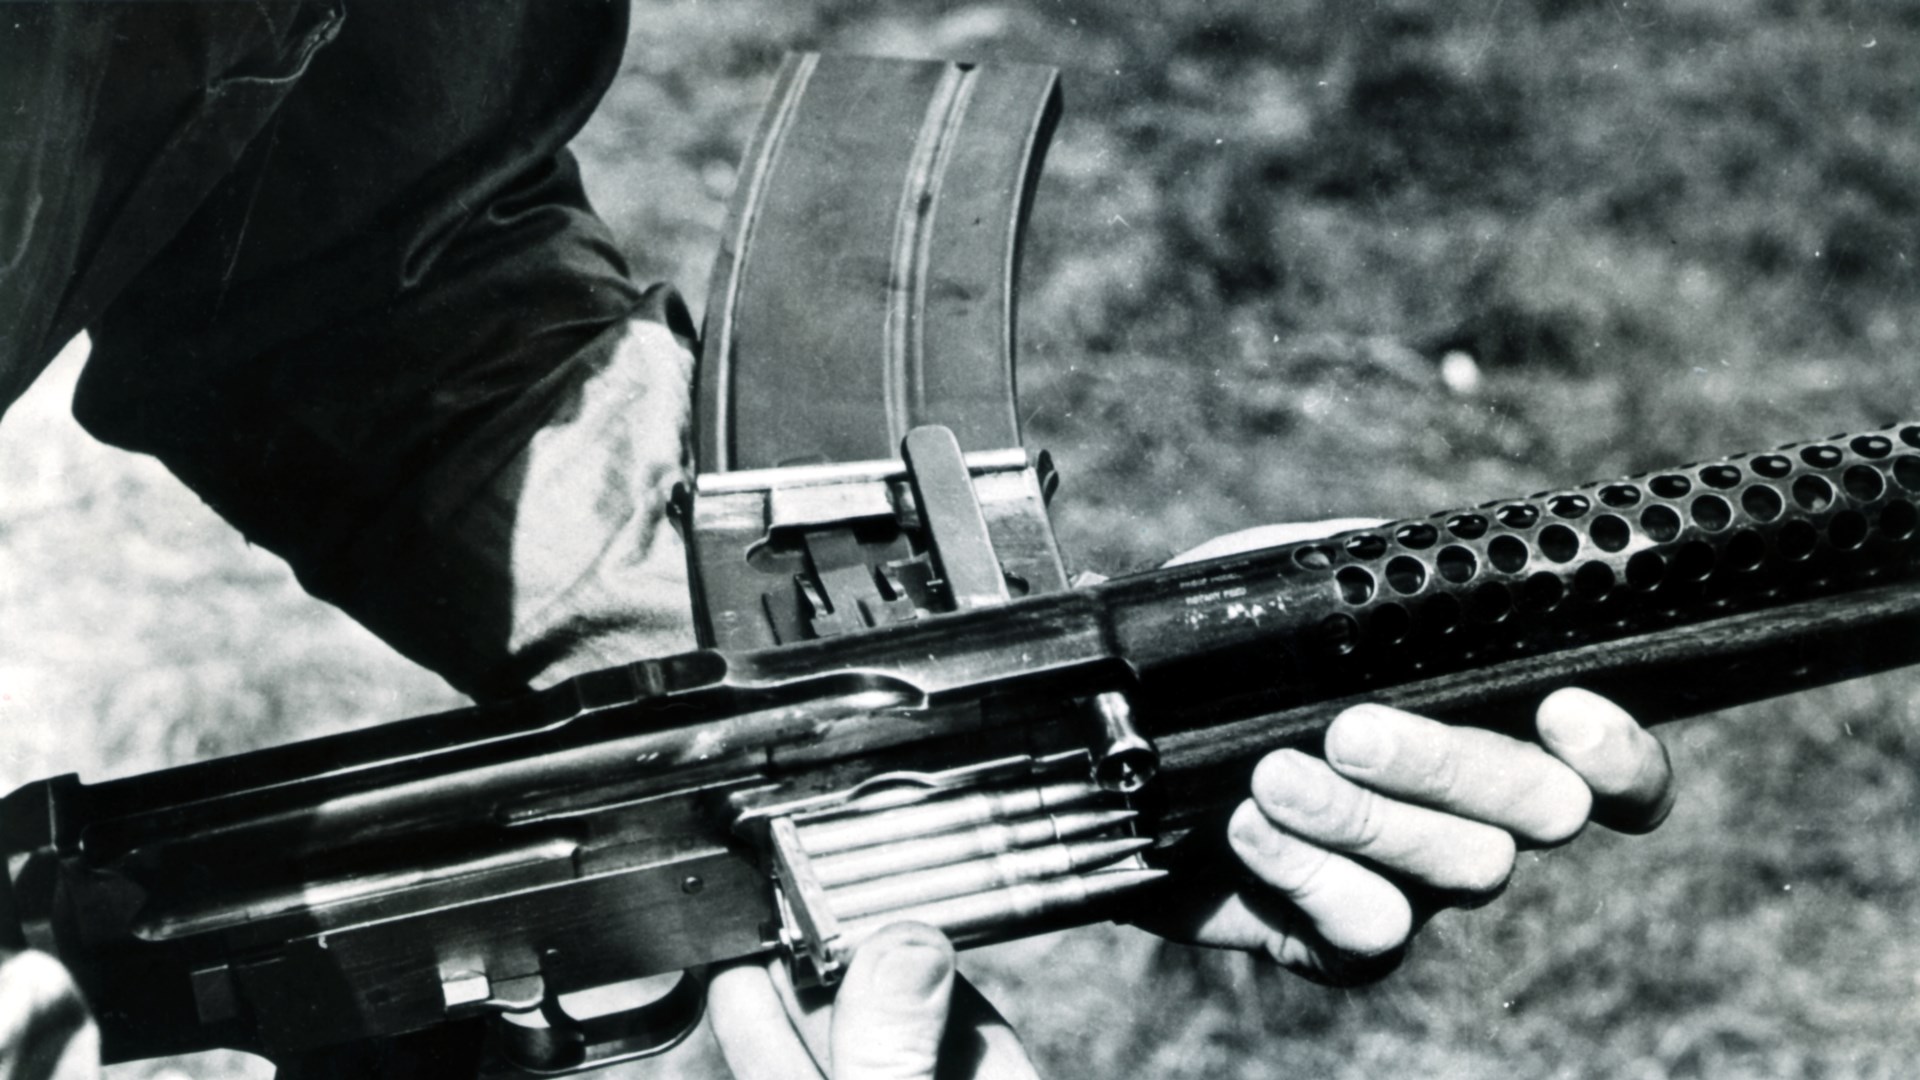 Melvin Johnson demonstrating the Johnson LMG during the summer of 1940. The firearm could be loaded by stripper clips at the ejection port, or single rounds could be loaded into the breech. Author’s collection